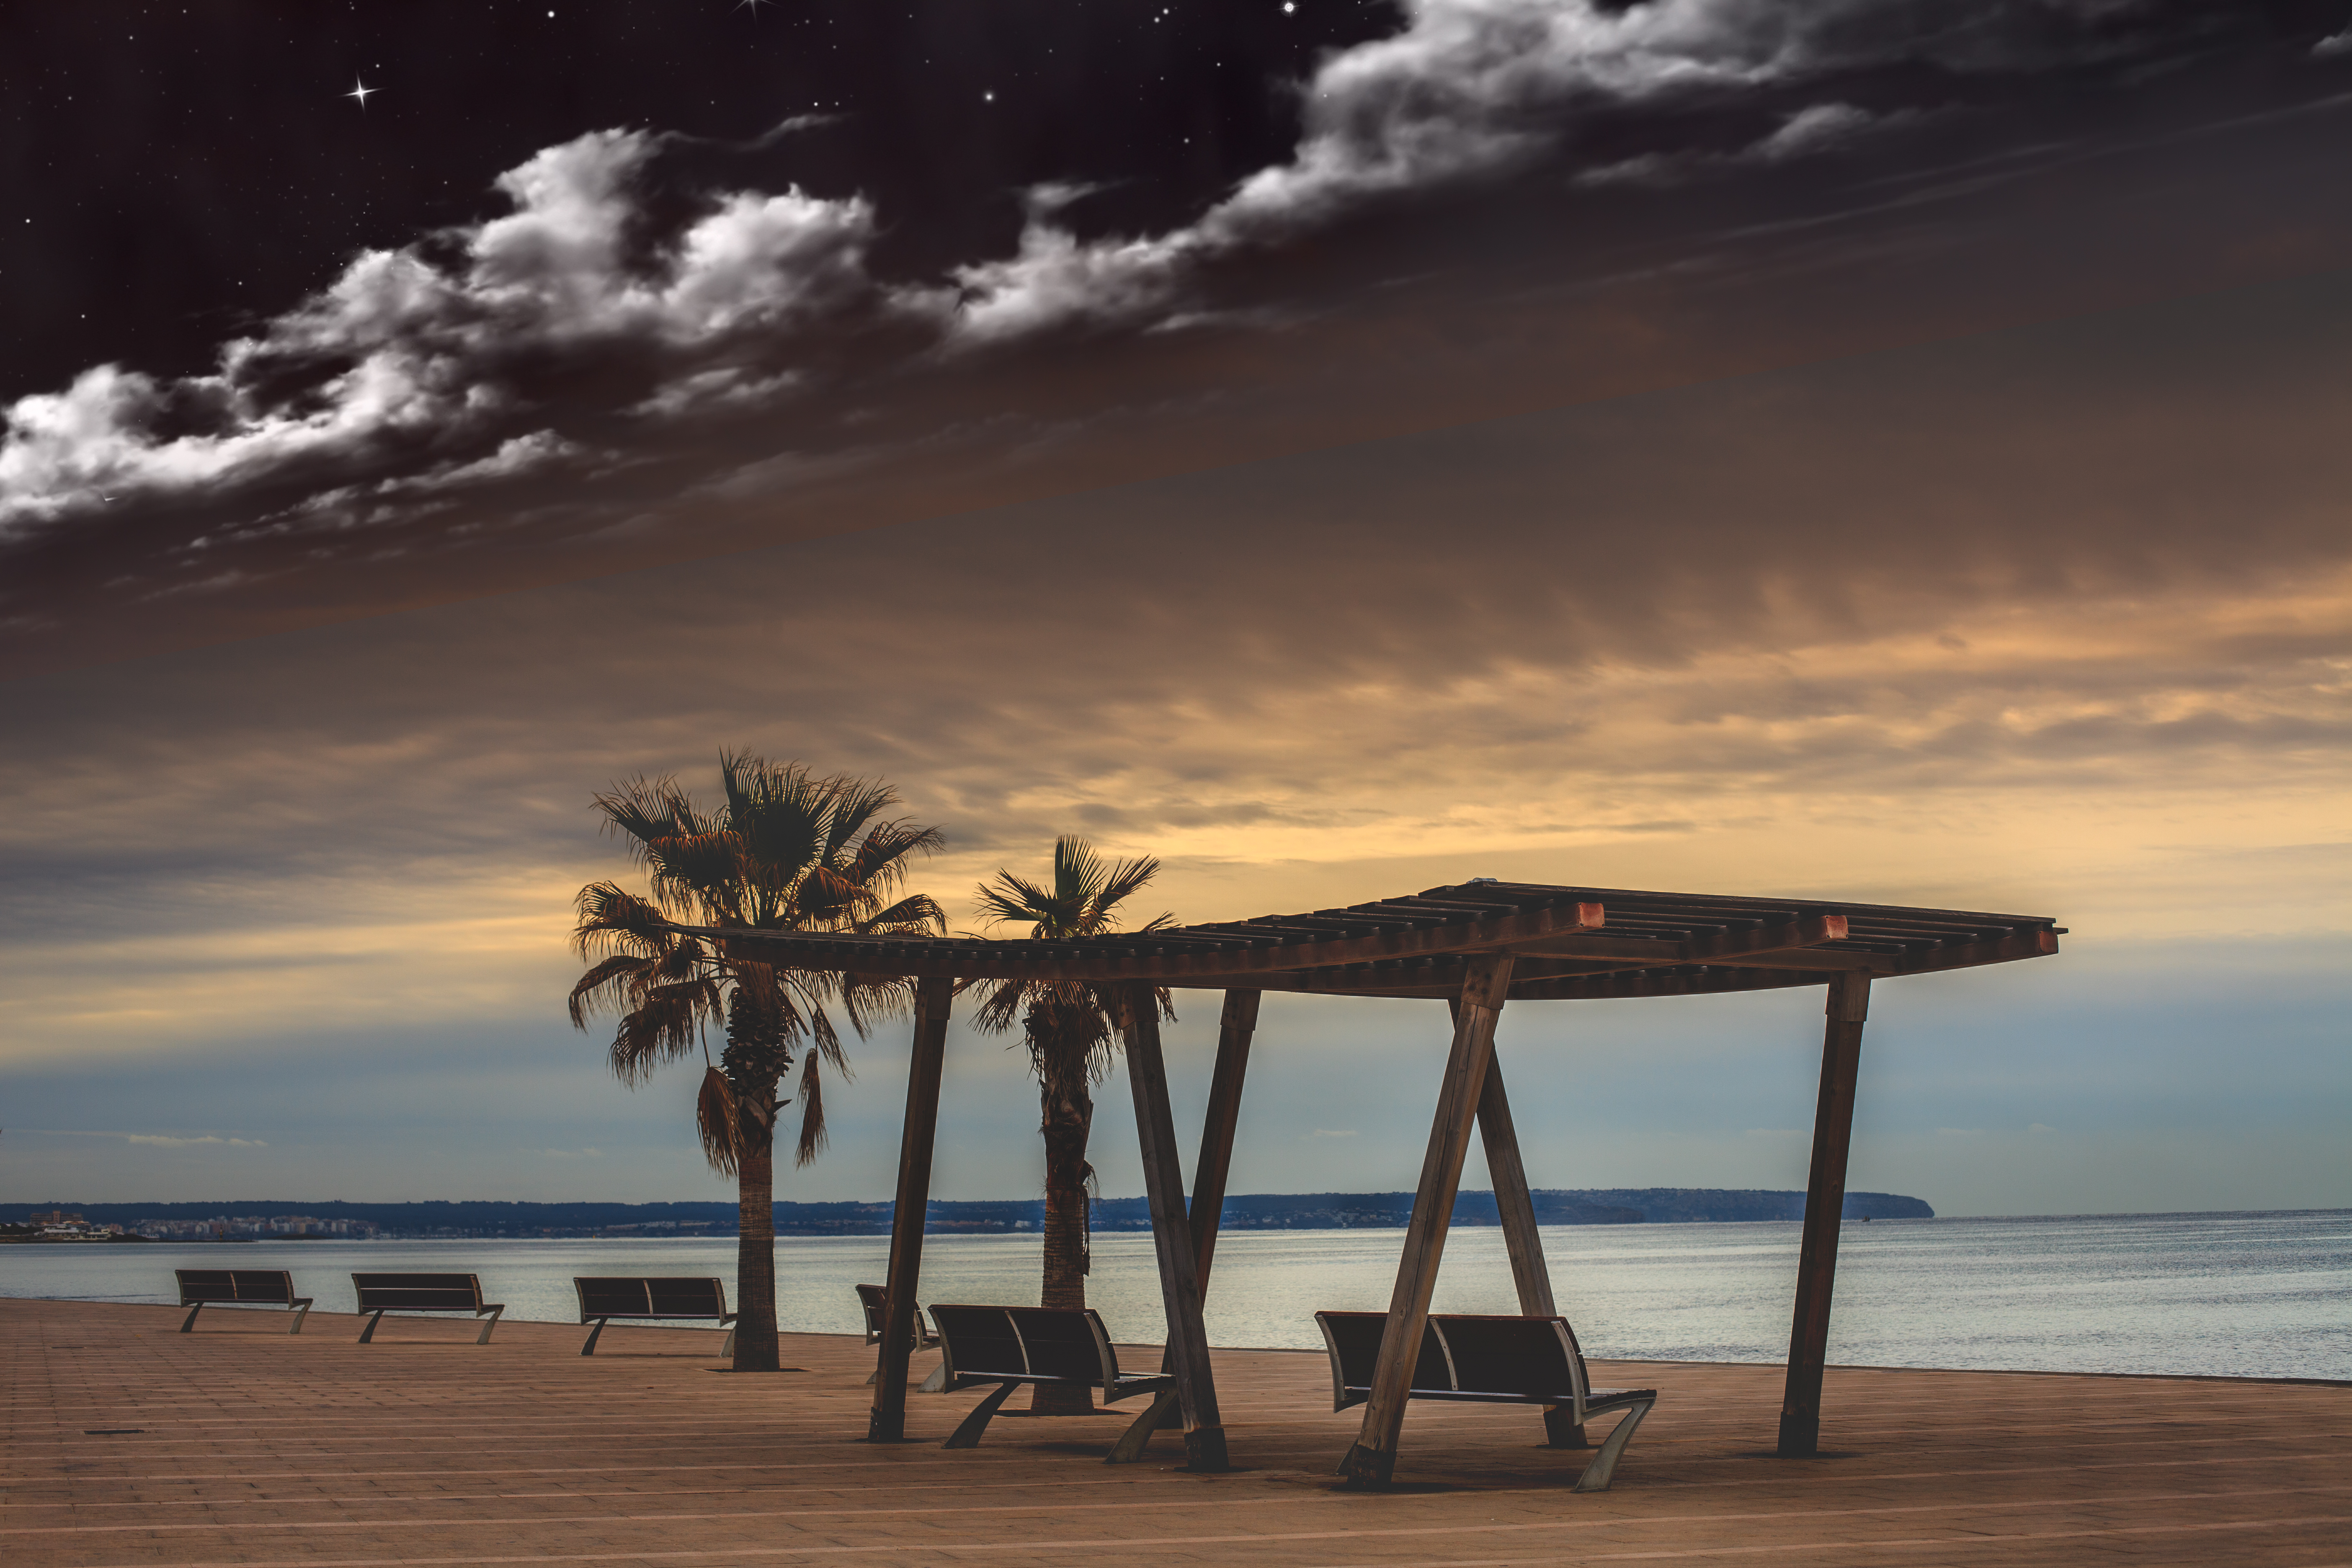 nature, benches, sea, clouds, palms, starry sky, relaxation, rest, evening